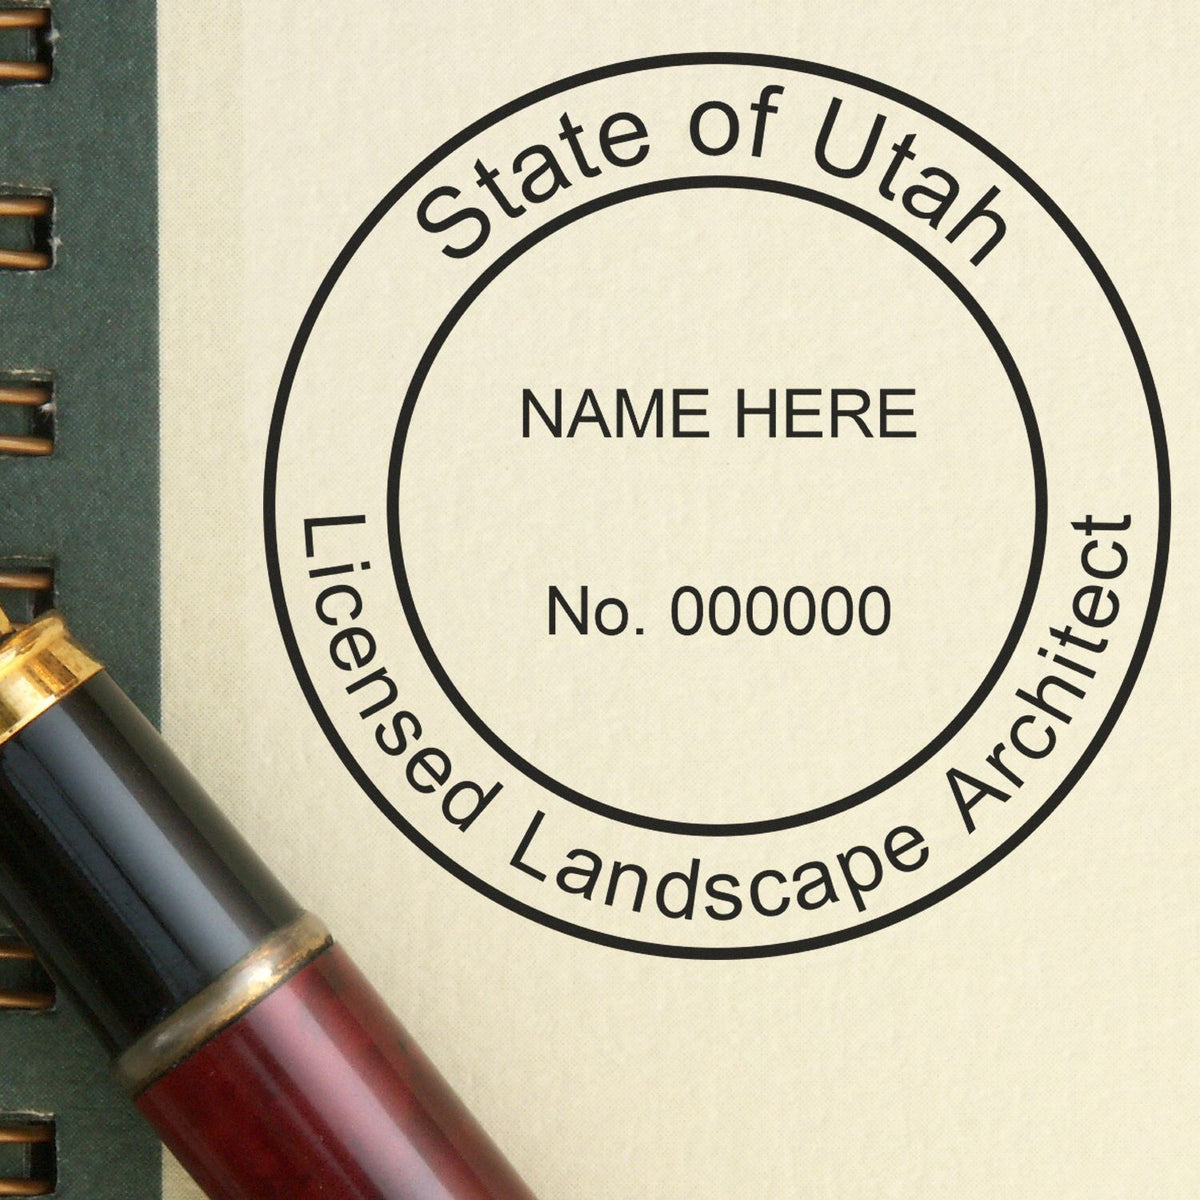 Premium MaxLight Pre-Inked Utah Landscape Architectural Stamp in use photo showing a stamped imprint of the Premium MaxLight Pre-Inked Utah Landscape Architectural Stamp